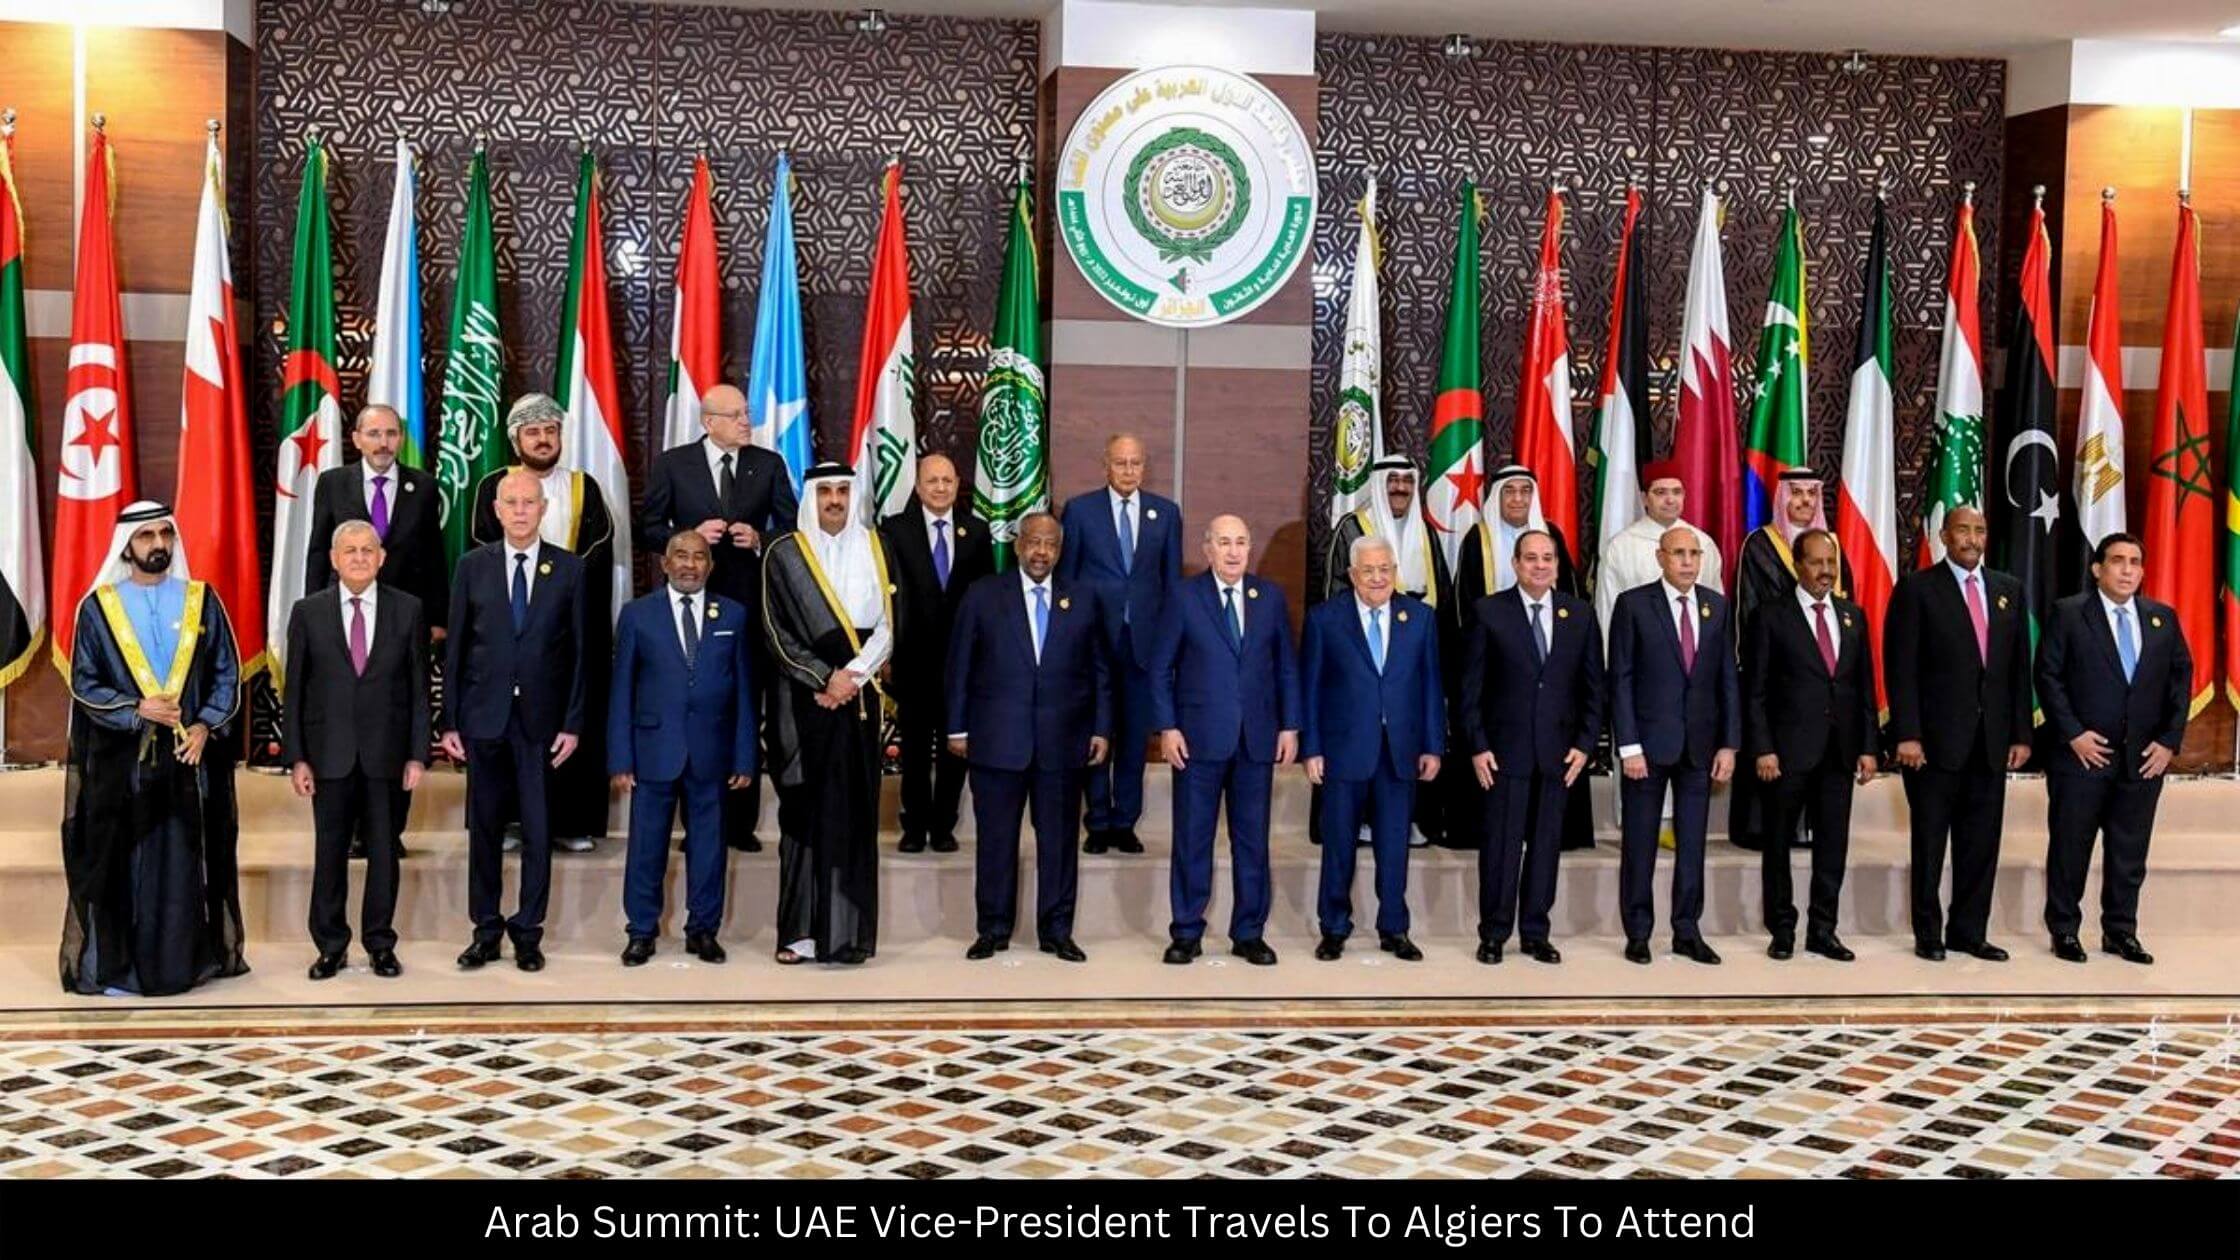 Arab Summit UAE Vice-President Travels To Algiers To Attend